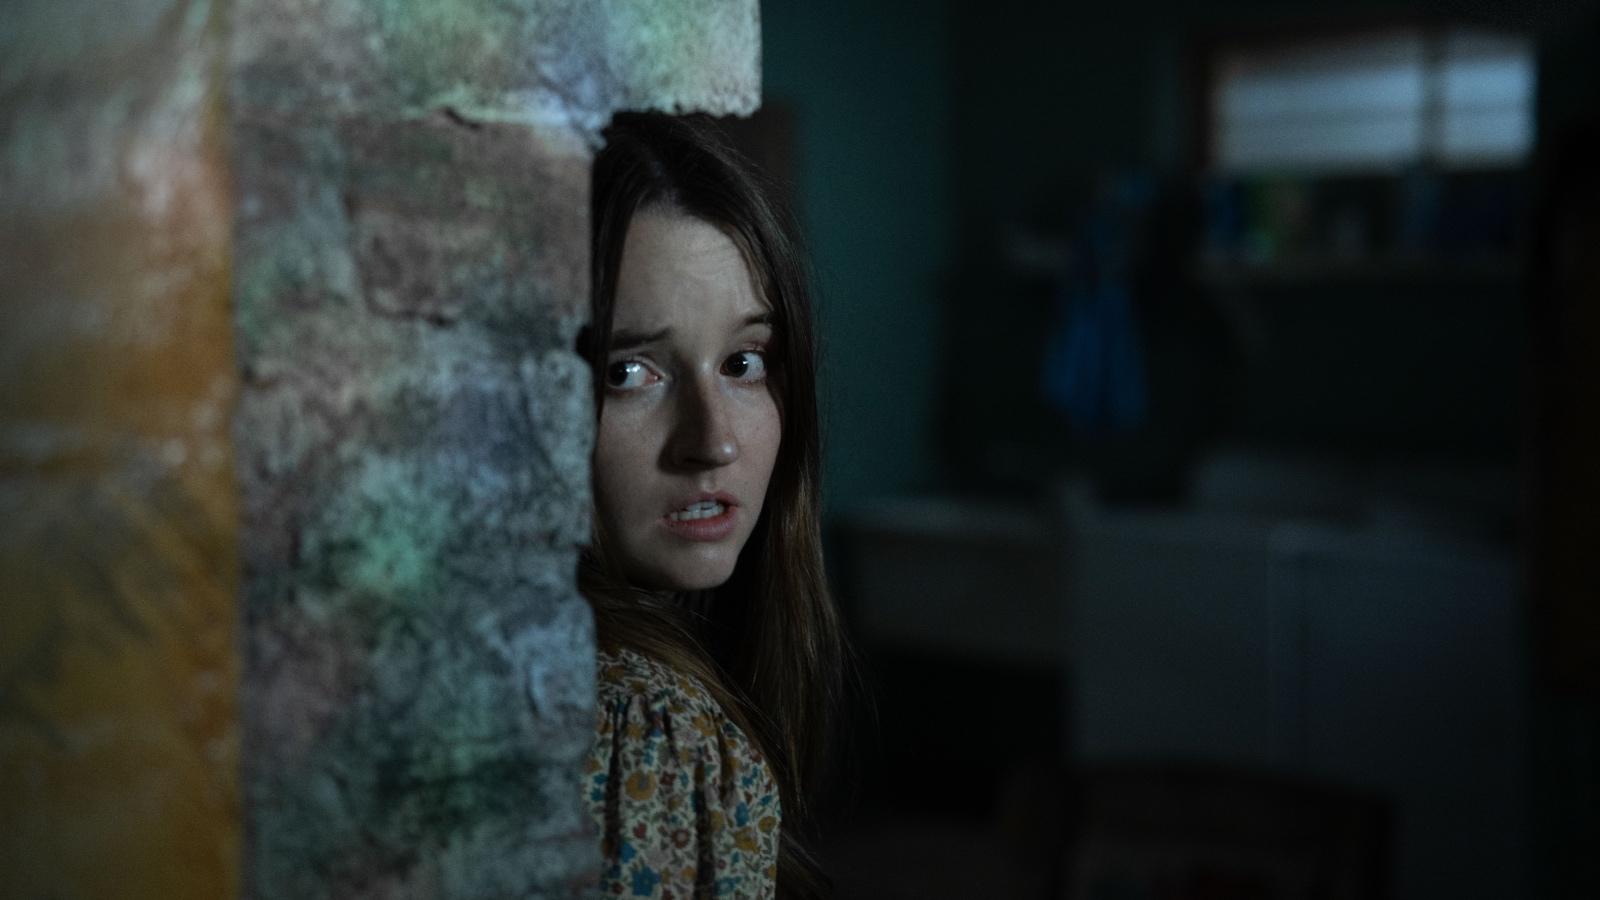 No One Will Save You stars Kaitlyn Dever